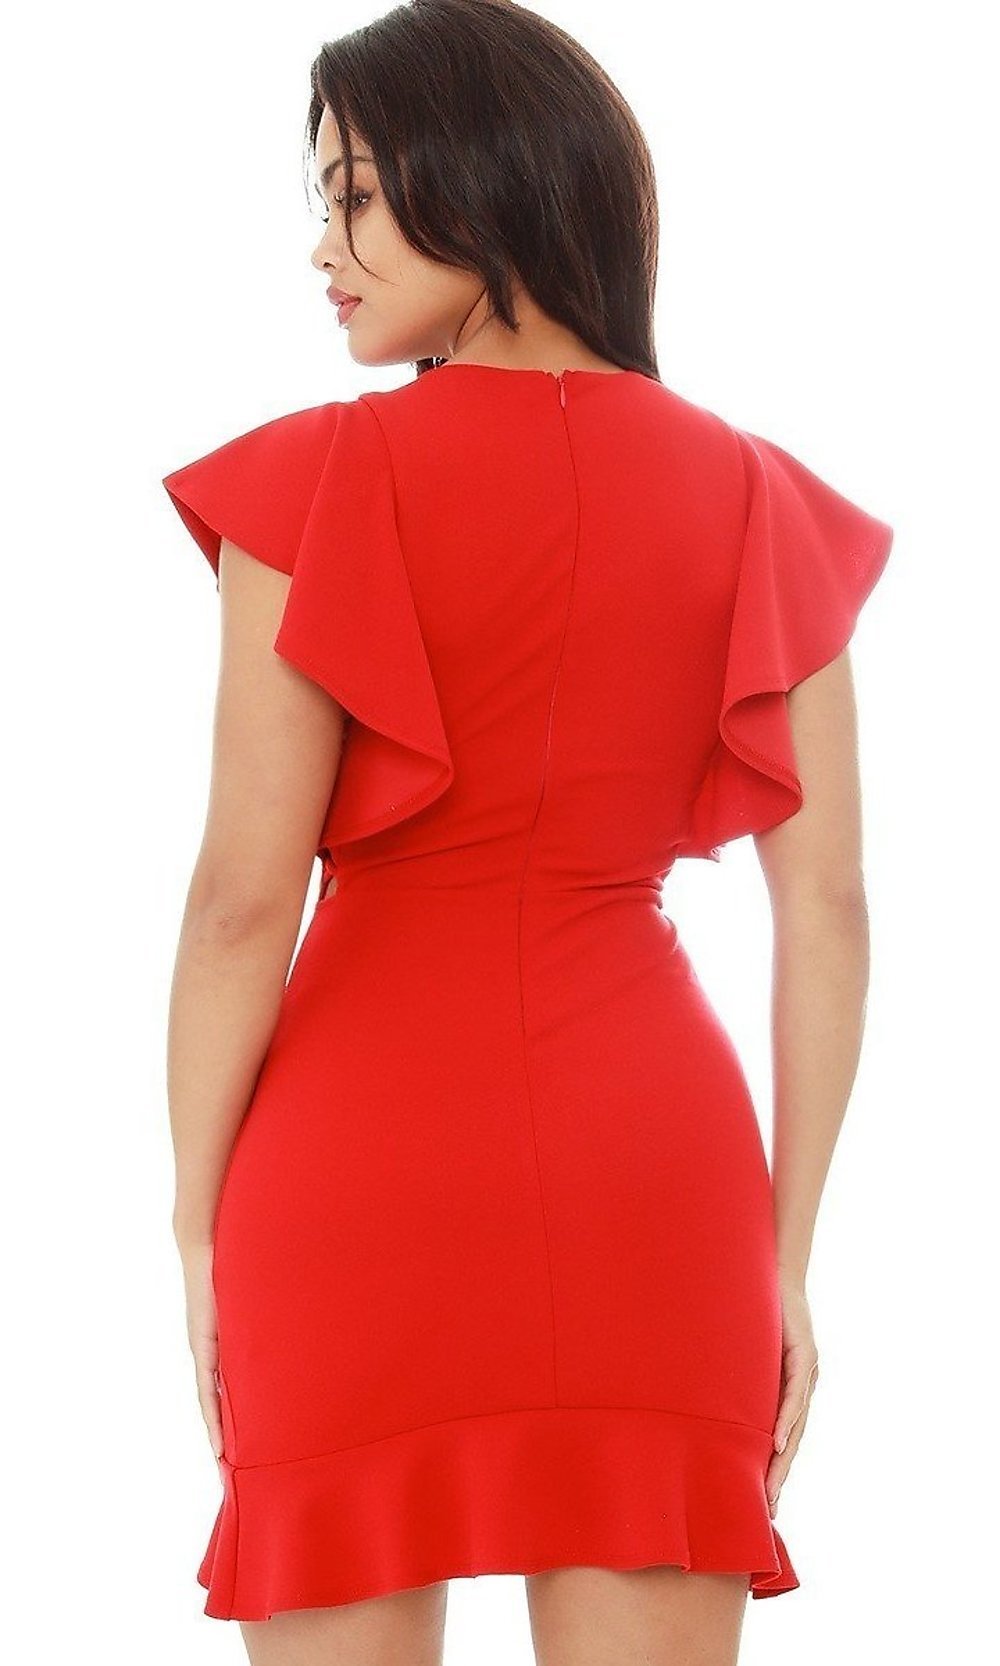 Red Strappy Short Cocktail Party Dress with Ruffle